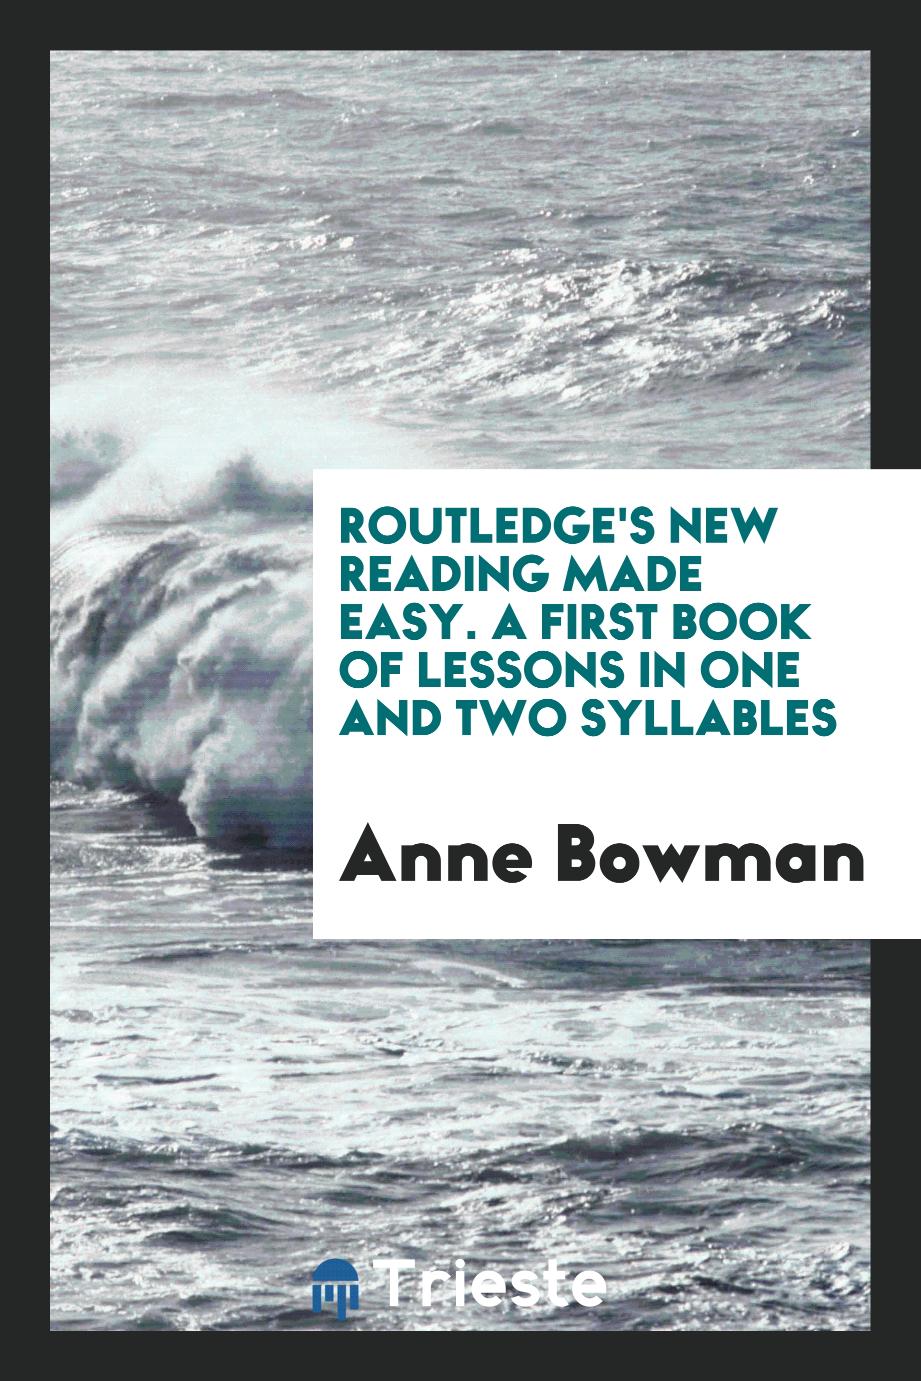 Routledge's New Reading Made Easy. A First Book of Lessons in One and Two Syllables